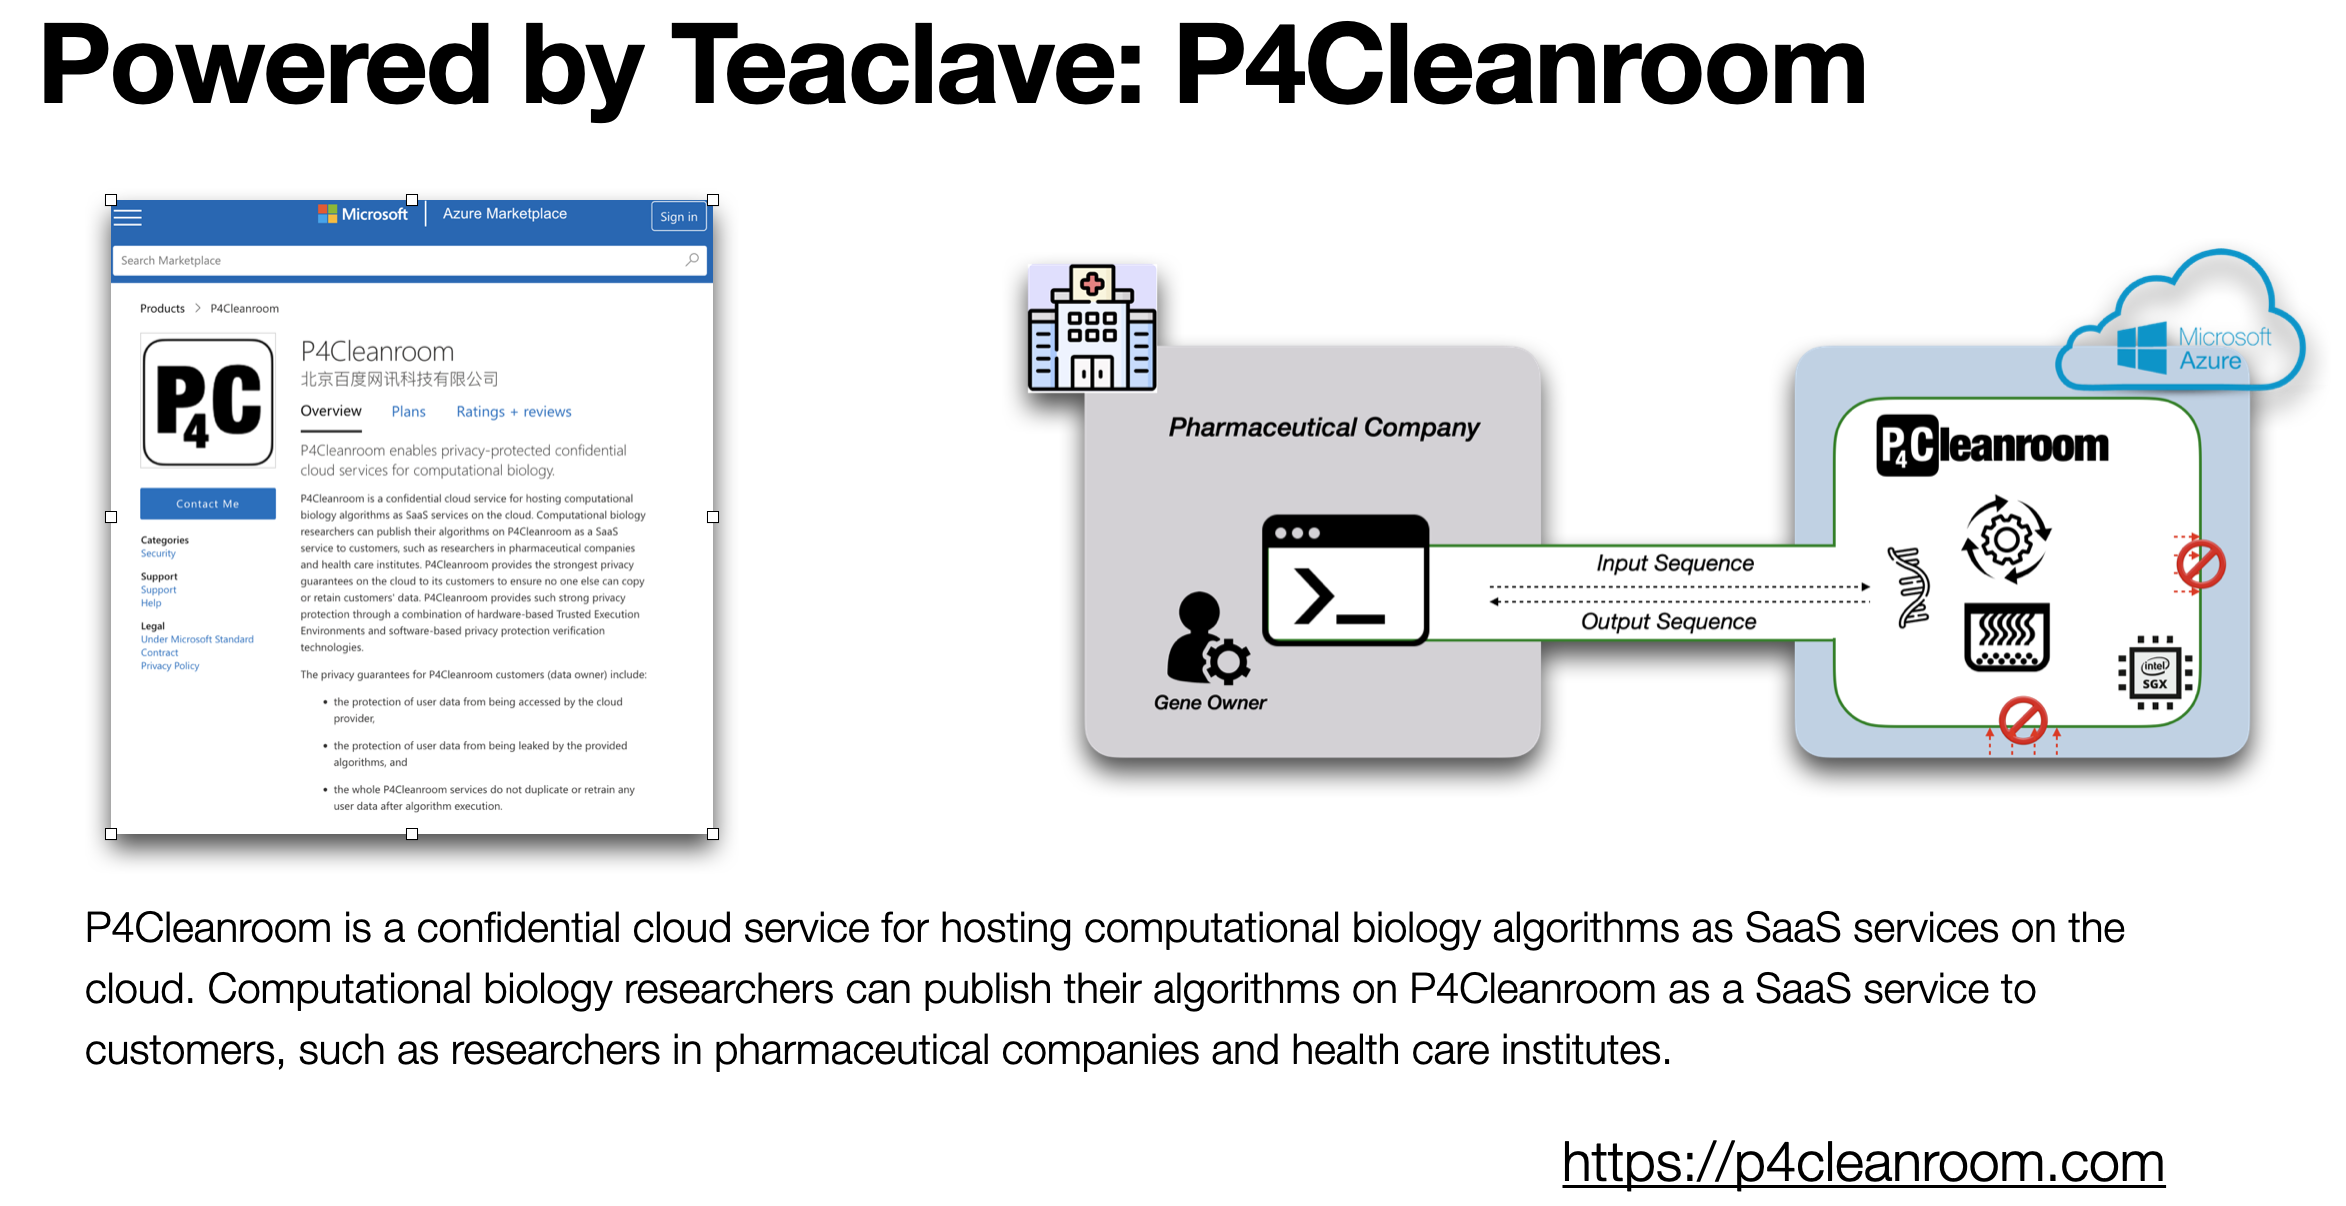 P4Cleanroom - Powered by Teclave